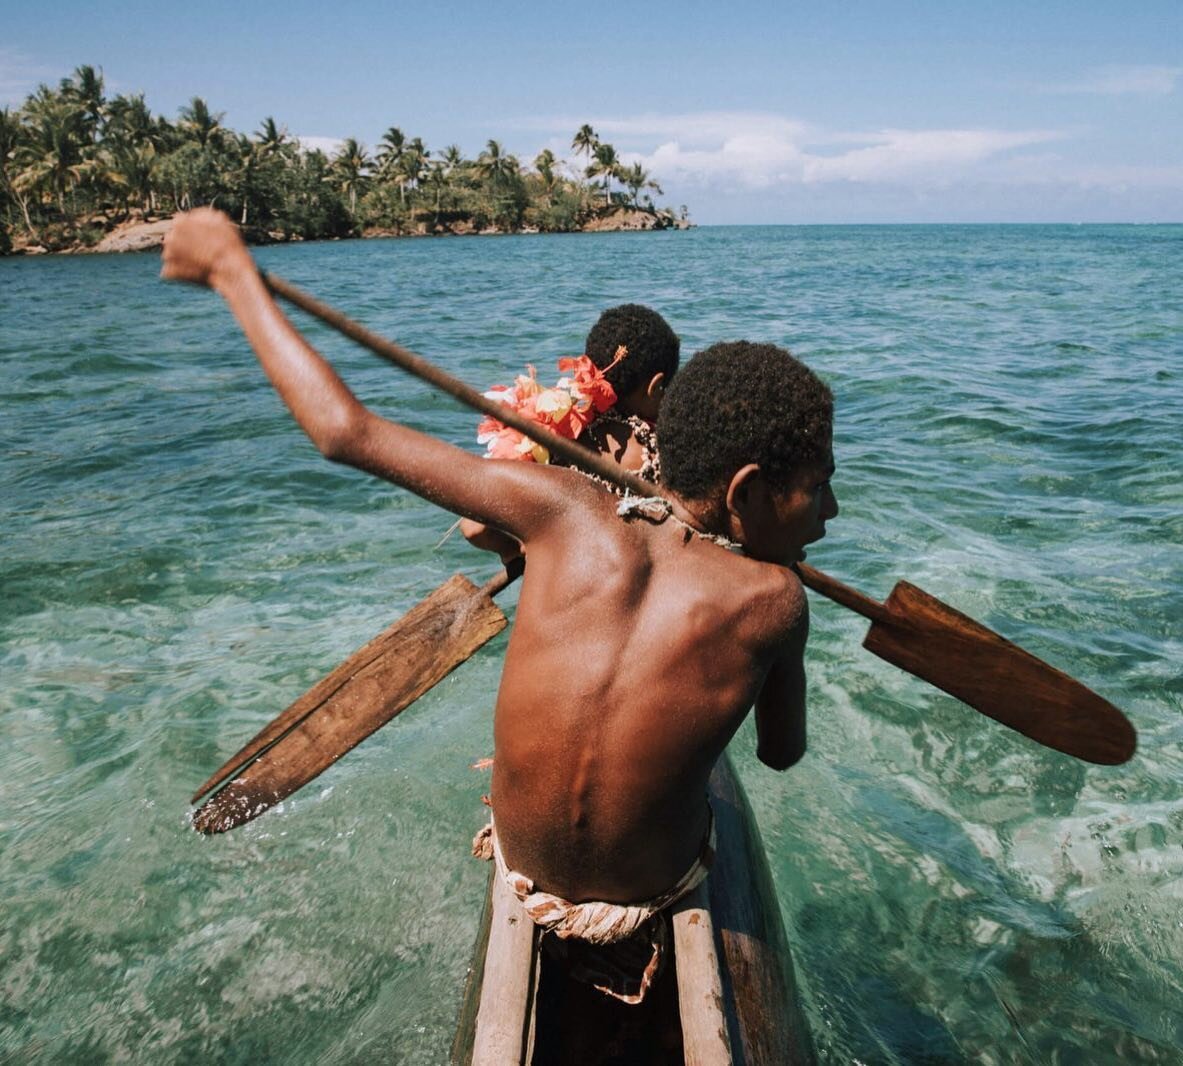 A N C I E N T&nbsp; tribes, modern times... &rsquo;Village of Paradise&rsquo; is a photographic journey through the remote&nbsp;villages of Oro Province, Papua New Guinea, to discover an ancient culture still thriving in modern times.&nbsp;Australian